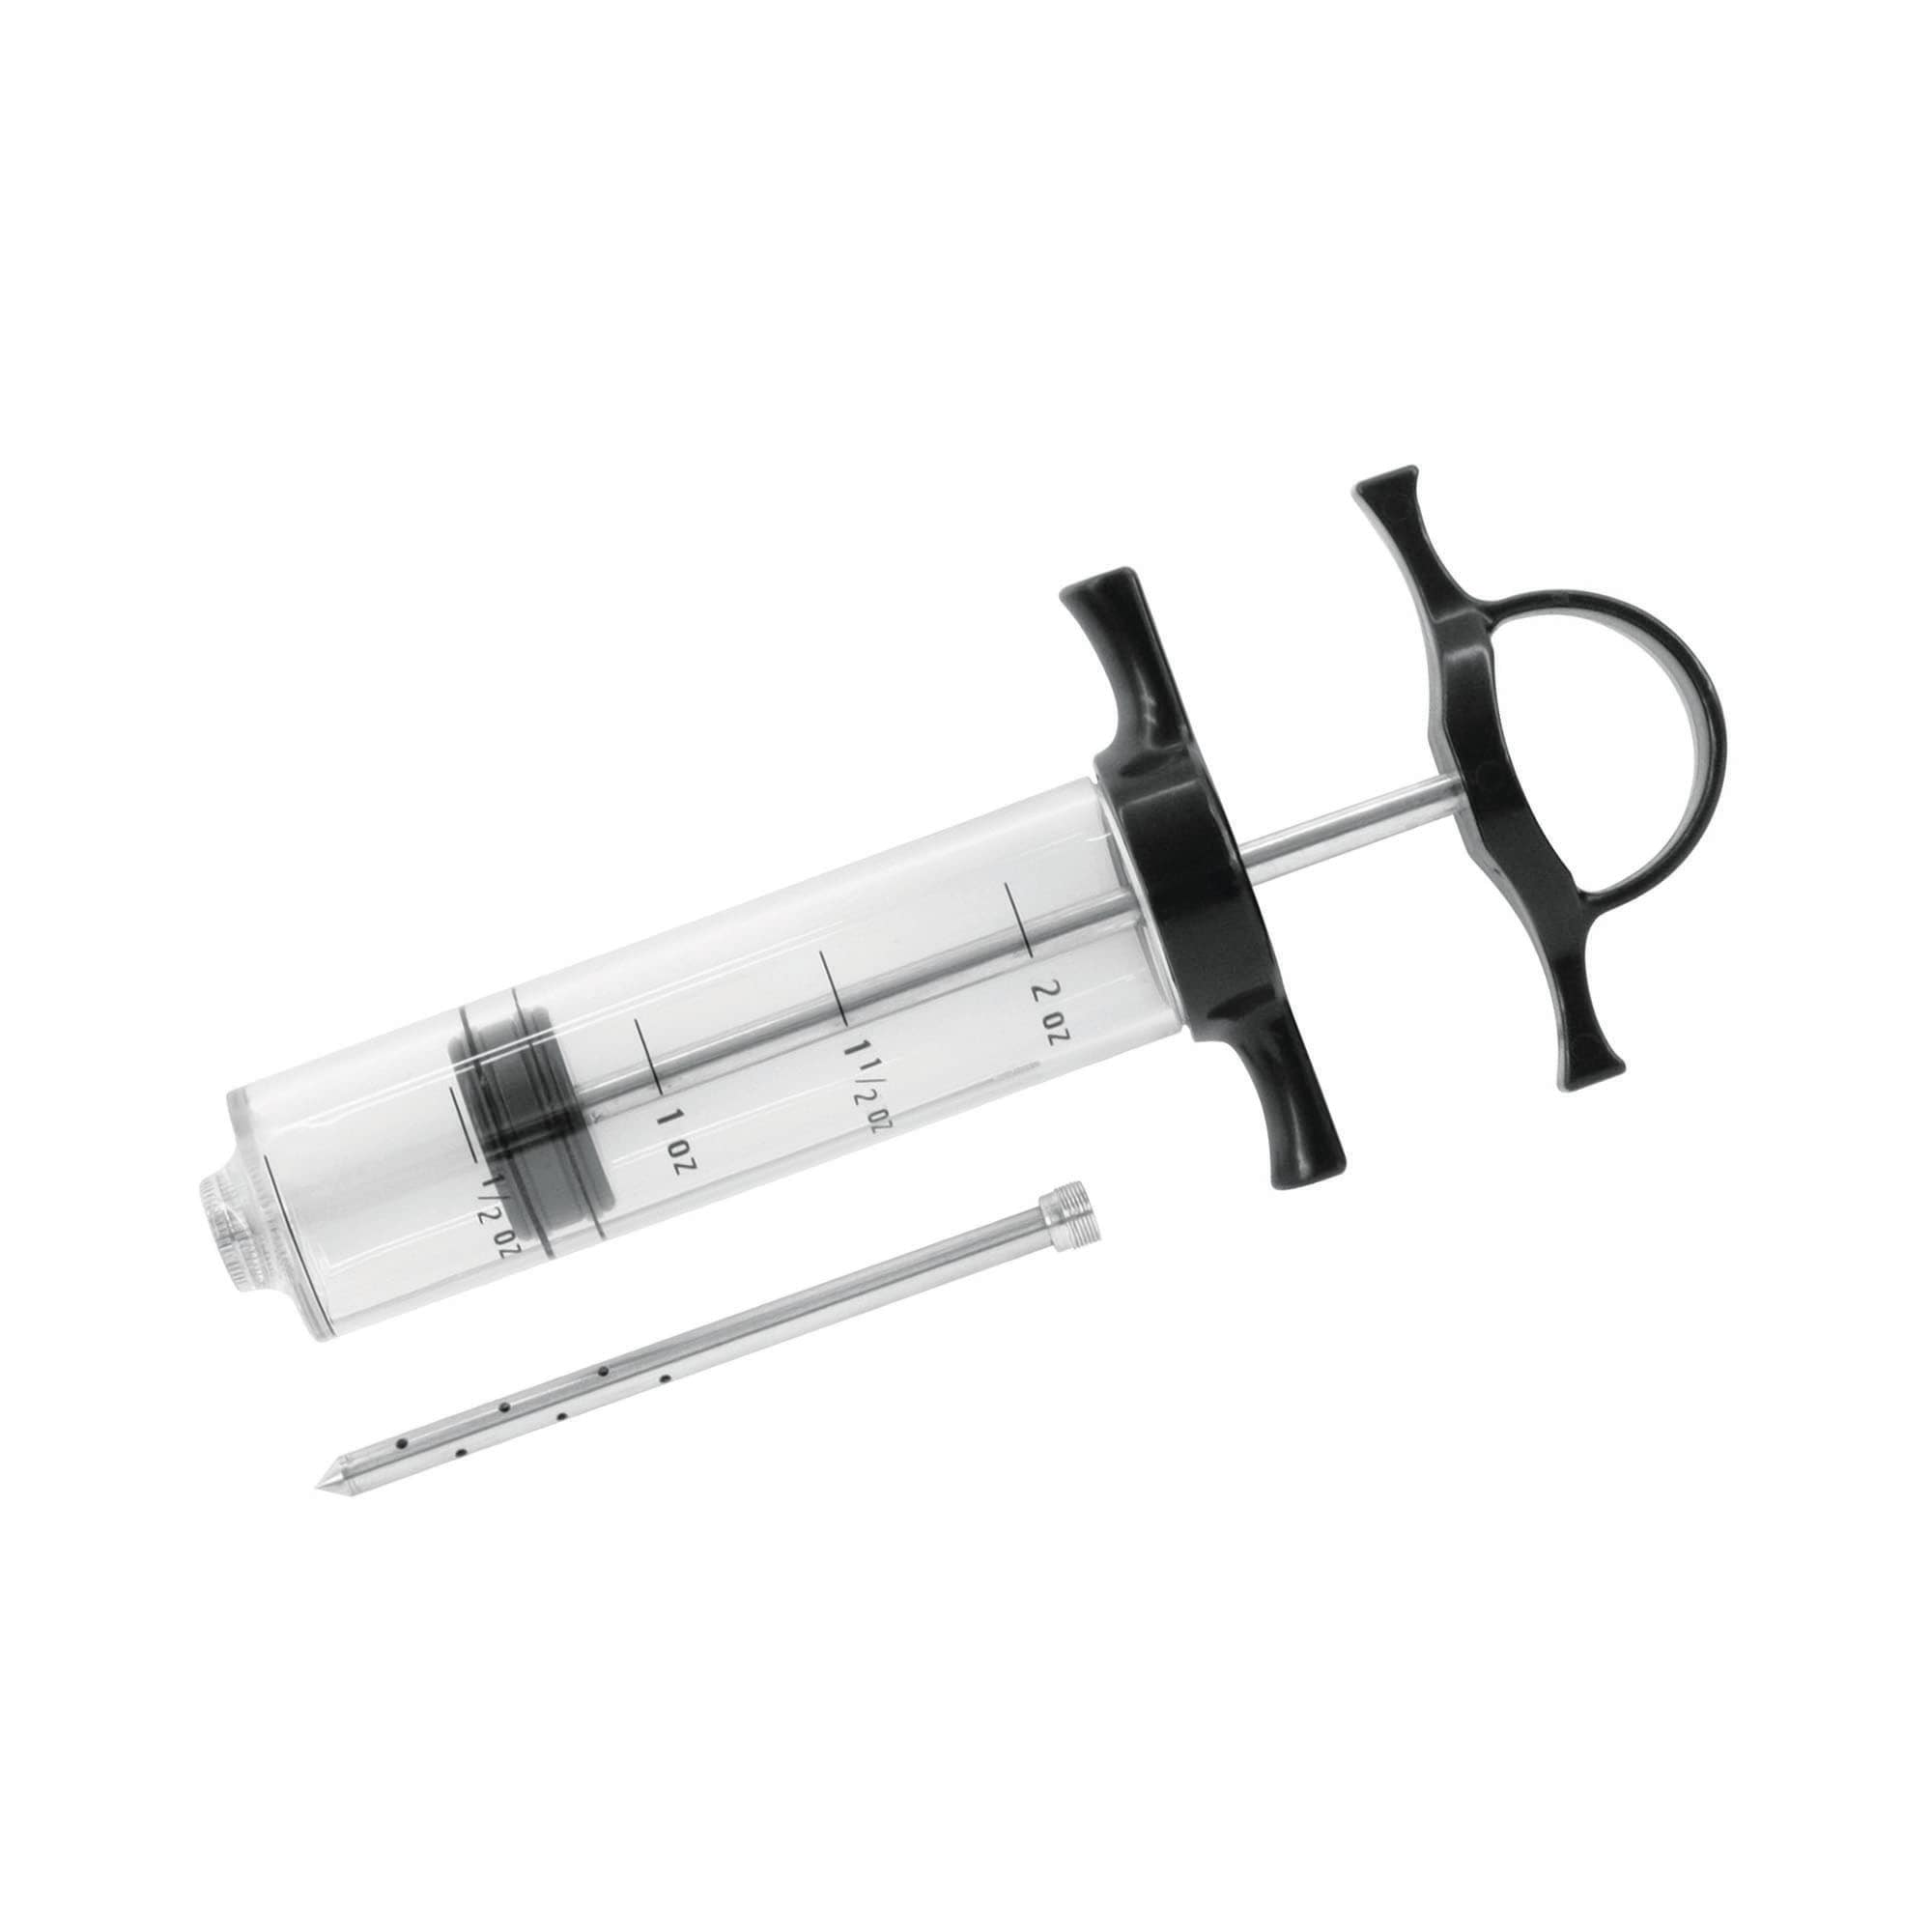 Meat Injector Syringe - 3 Marinade Injector Needles for BBQ Grill, Premium  Portable Turkey Injector kit for Smoker,Marinades Injector for Meats With